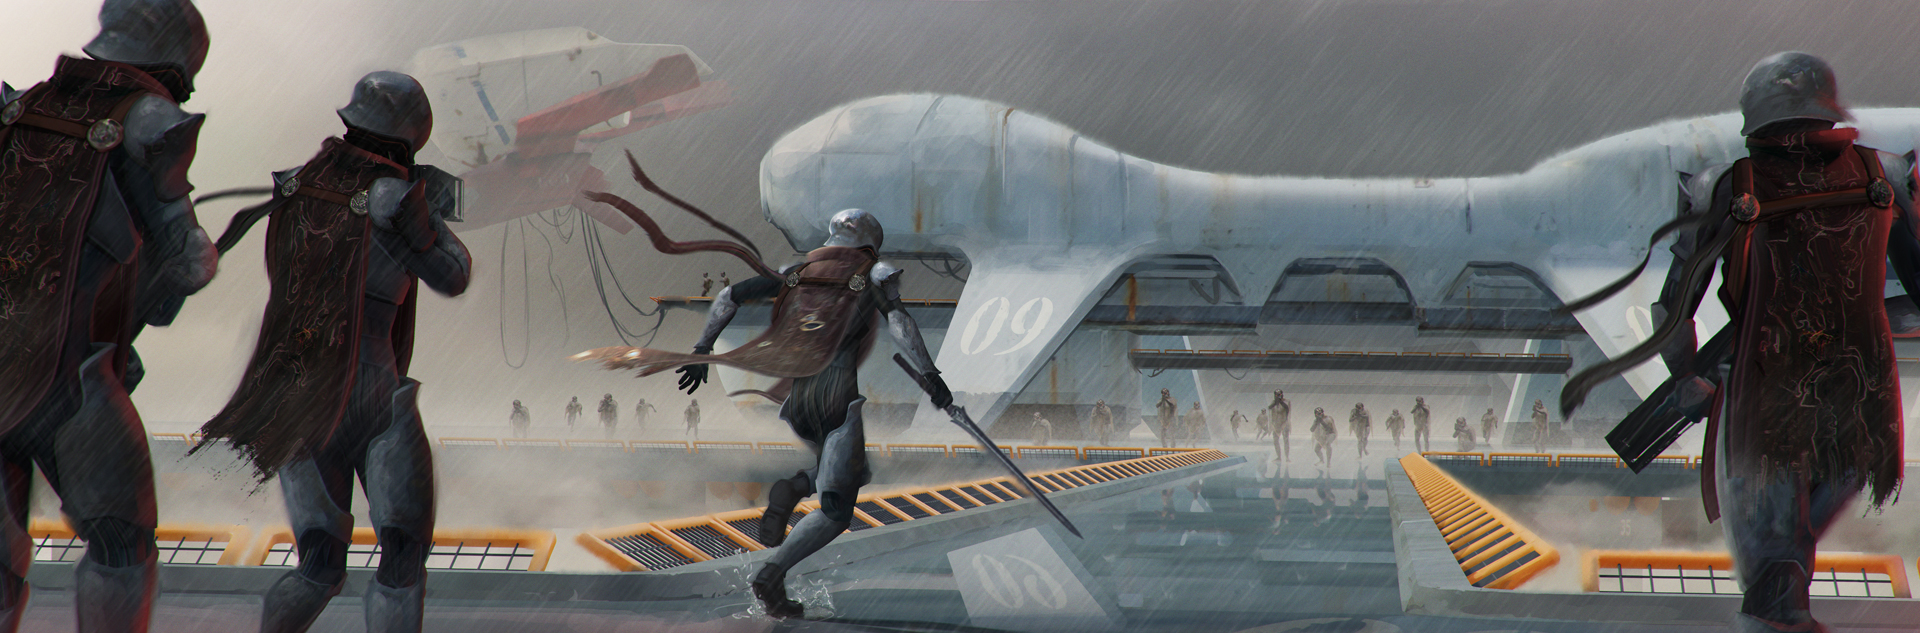 BA Games Art & Design work by Jake Miller showing alternate sci-fi troops rushing to cross a walkway on an off-shore airship station.